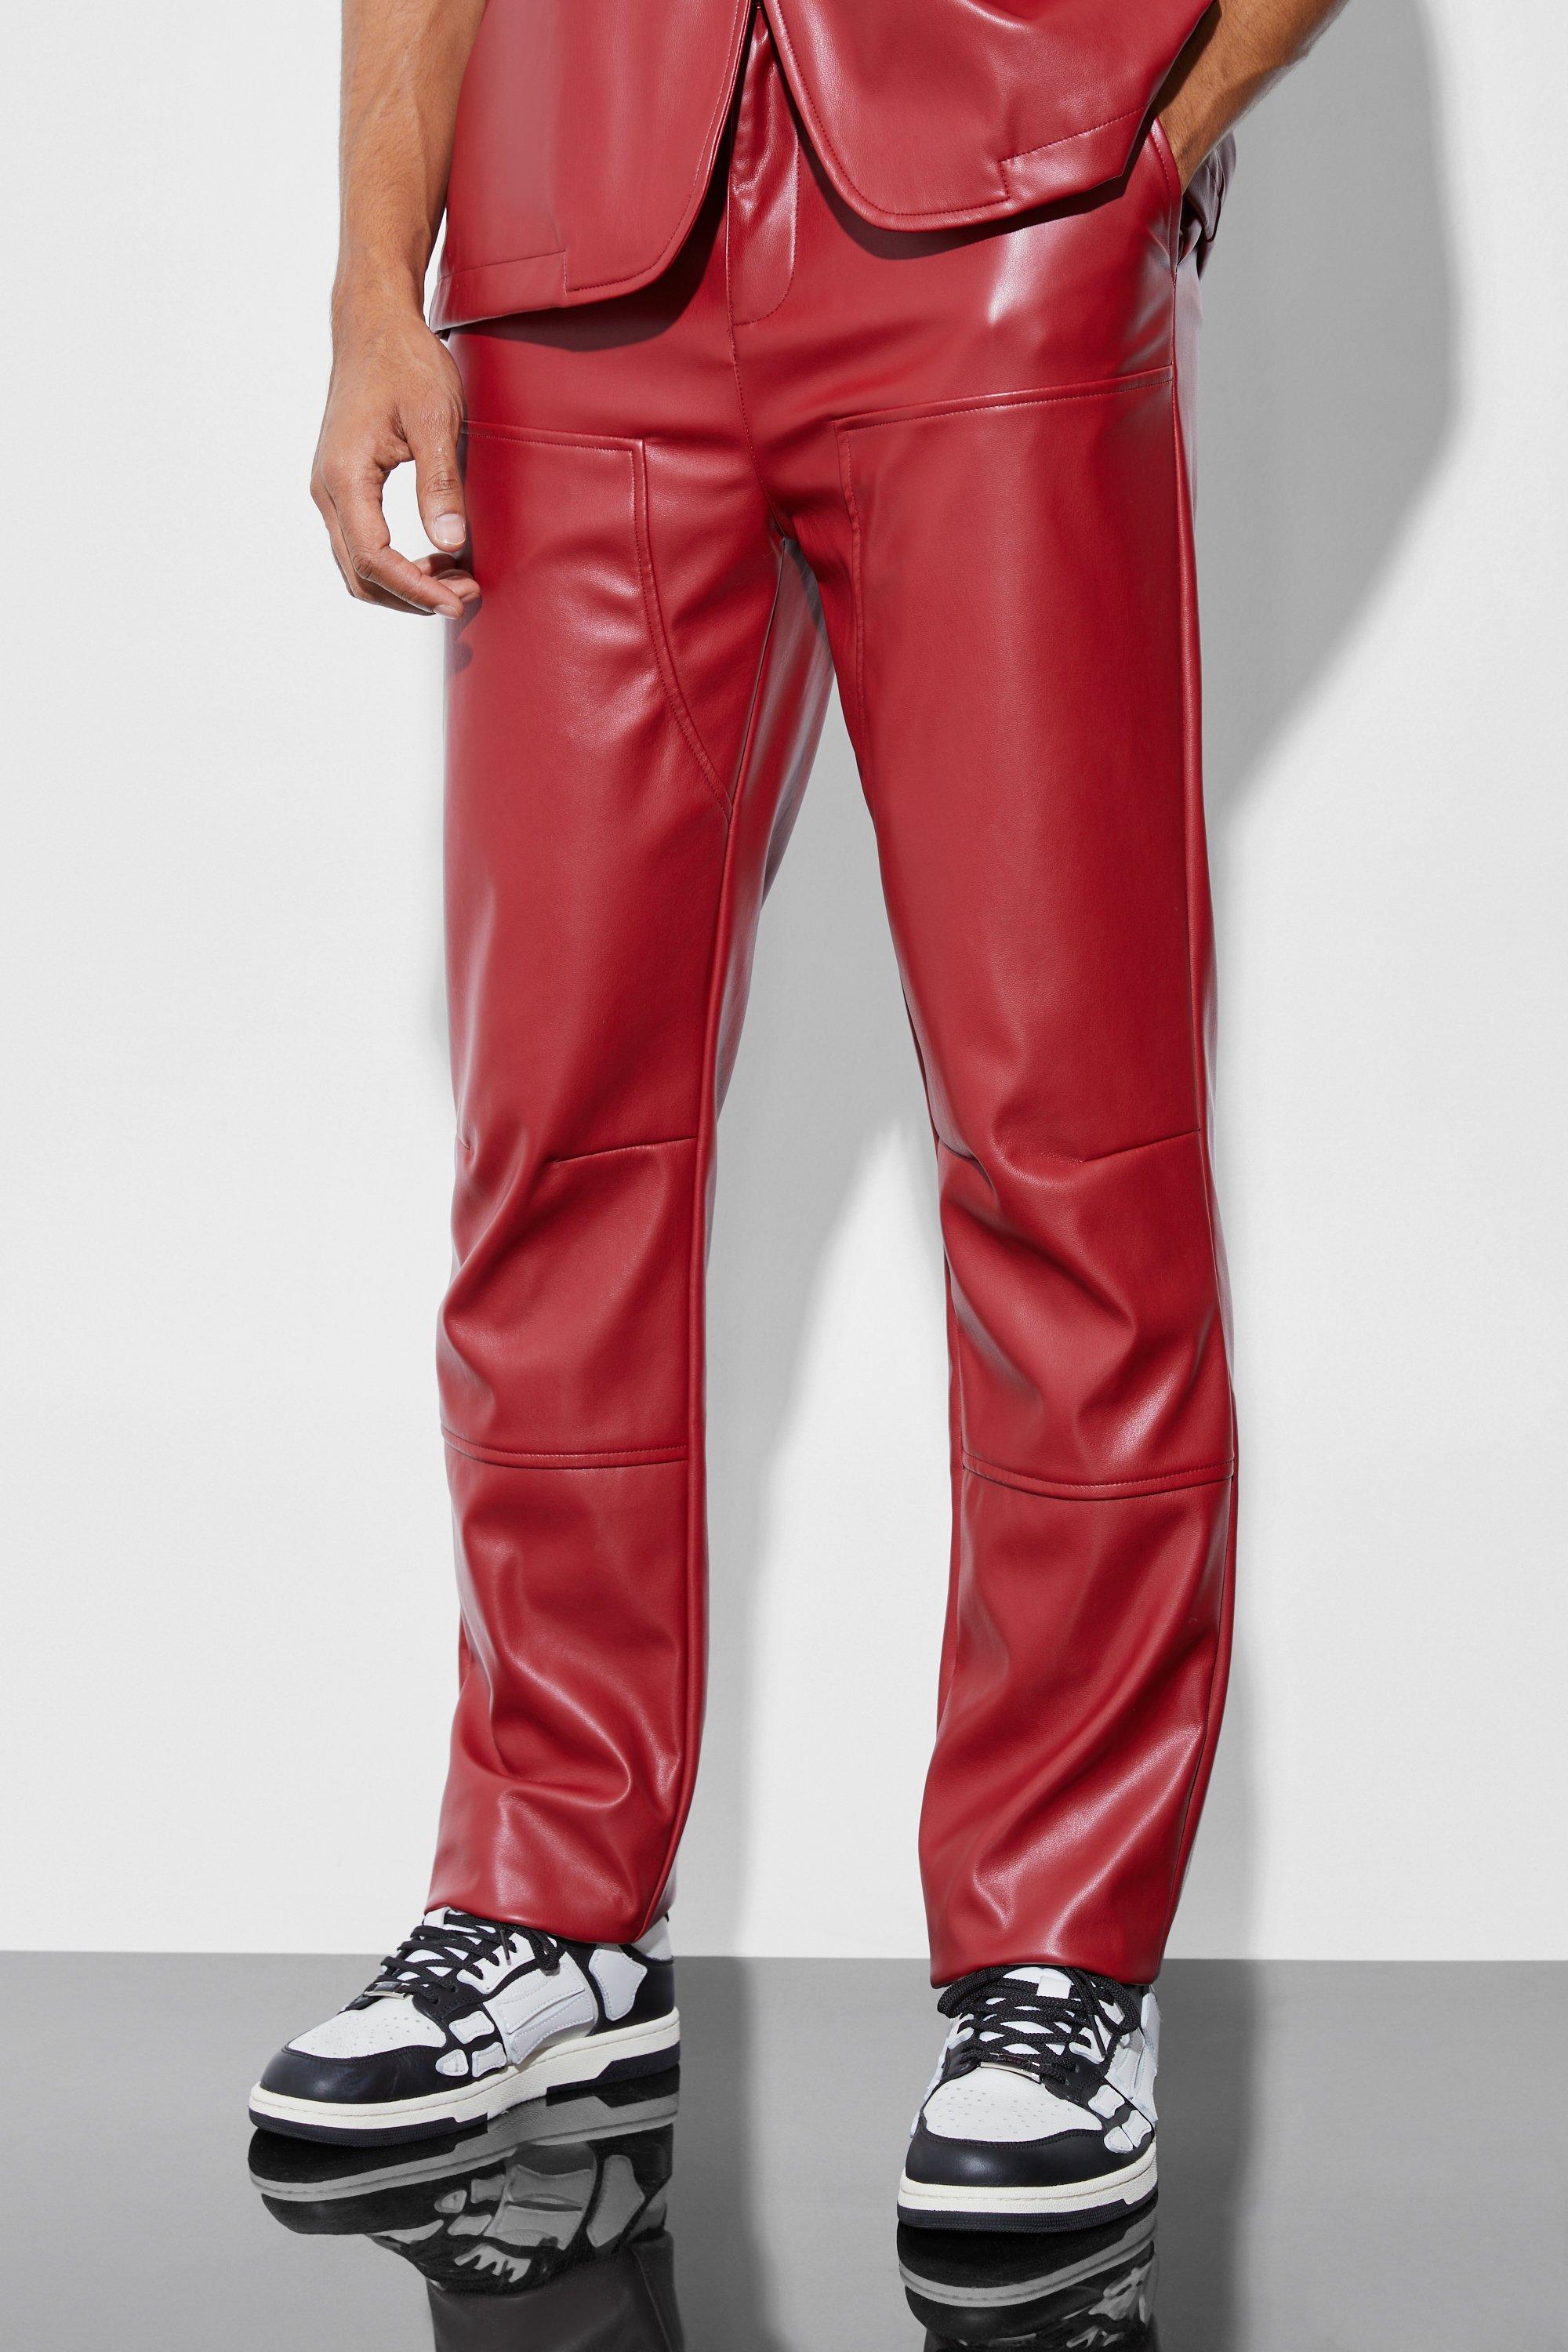 Vintage Red Loose Fit Red Pants For Men For Office And Streetwear Trendy  Trousers From Pattern68, $36.99 | DHgate.Com